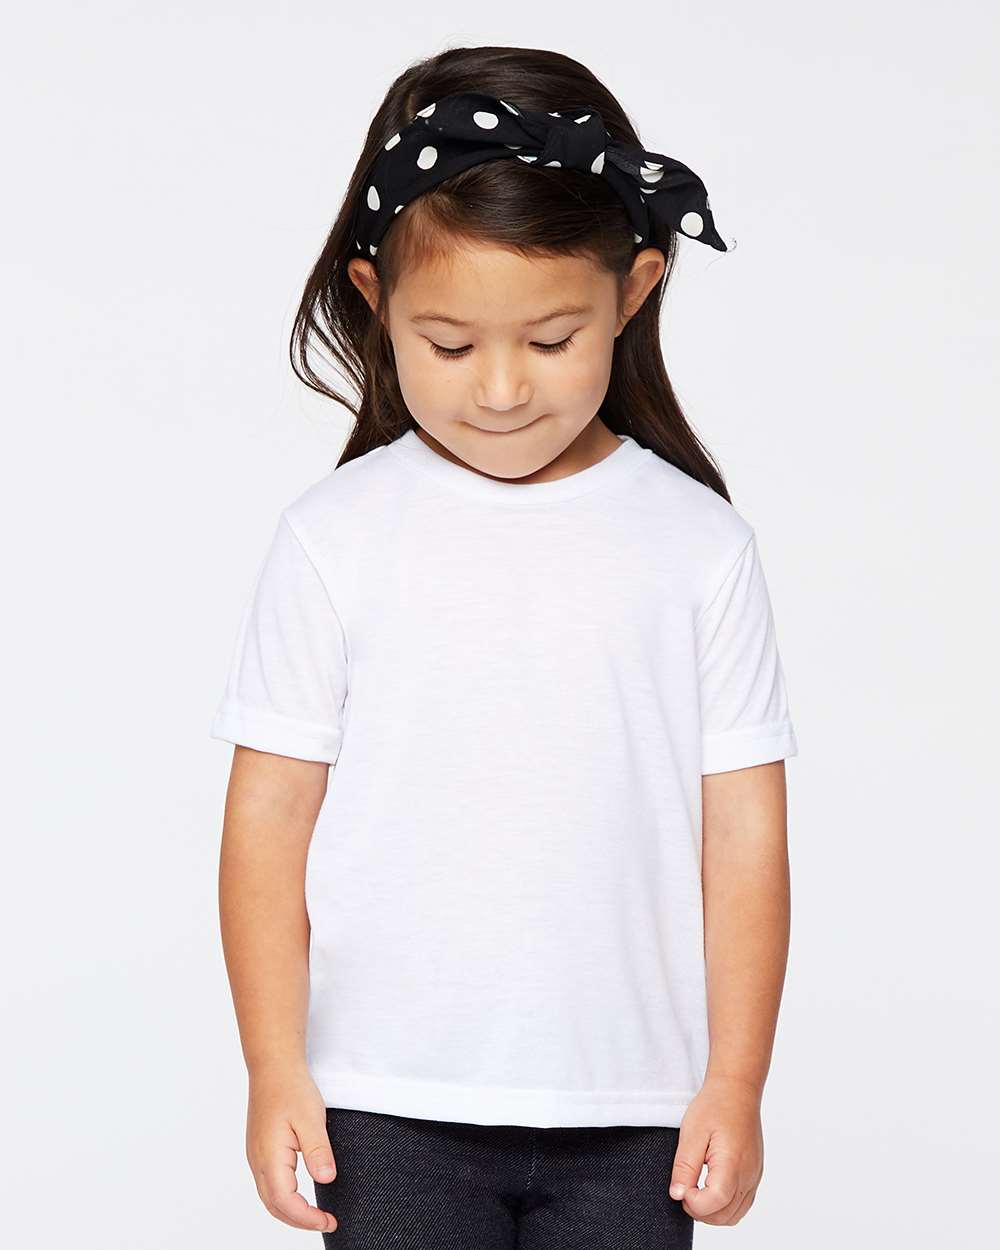 Sublivie 1310 - Toddler Polyester Sublimation Tee